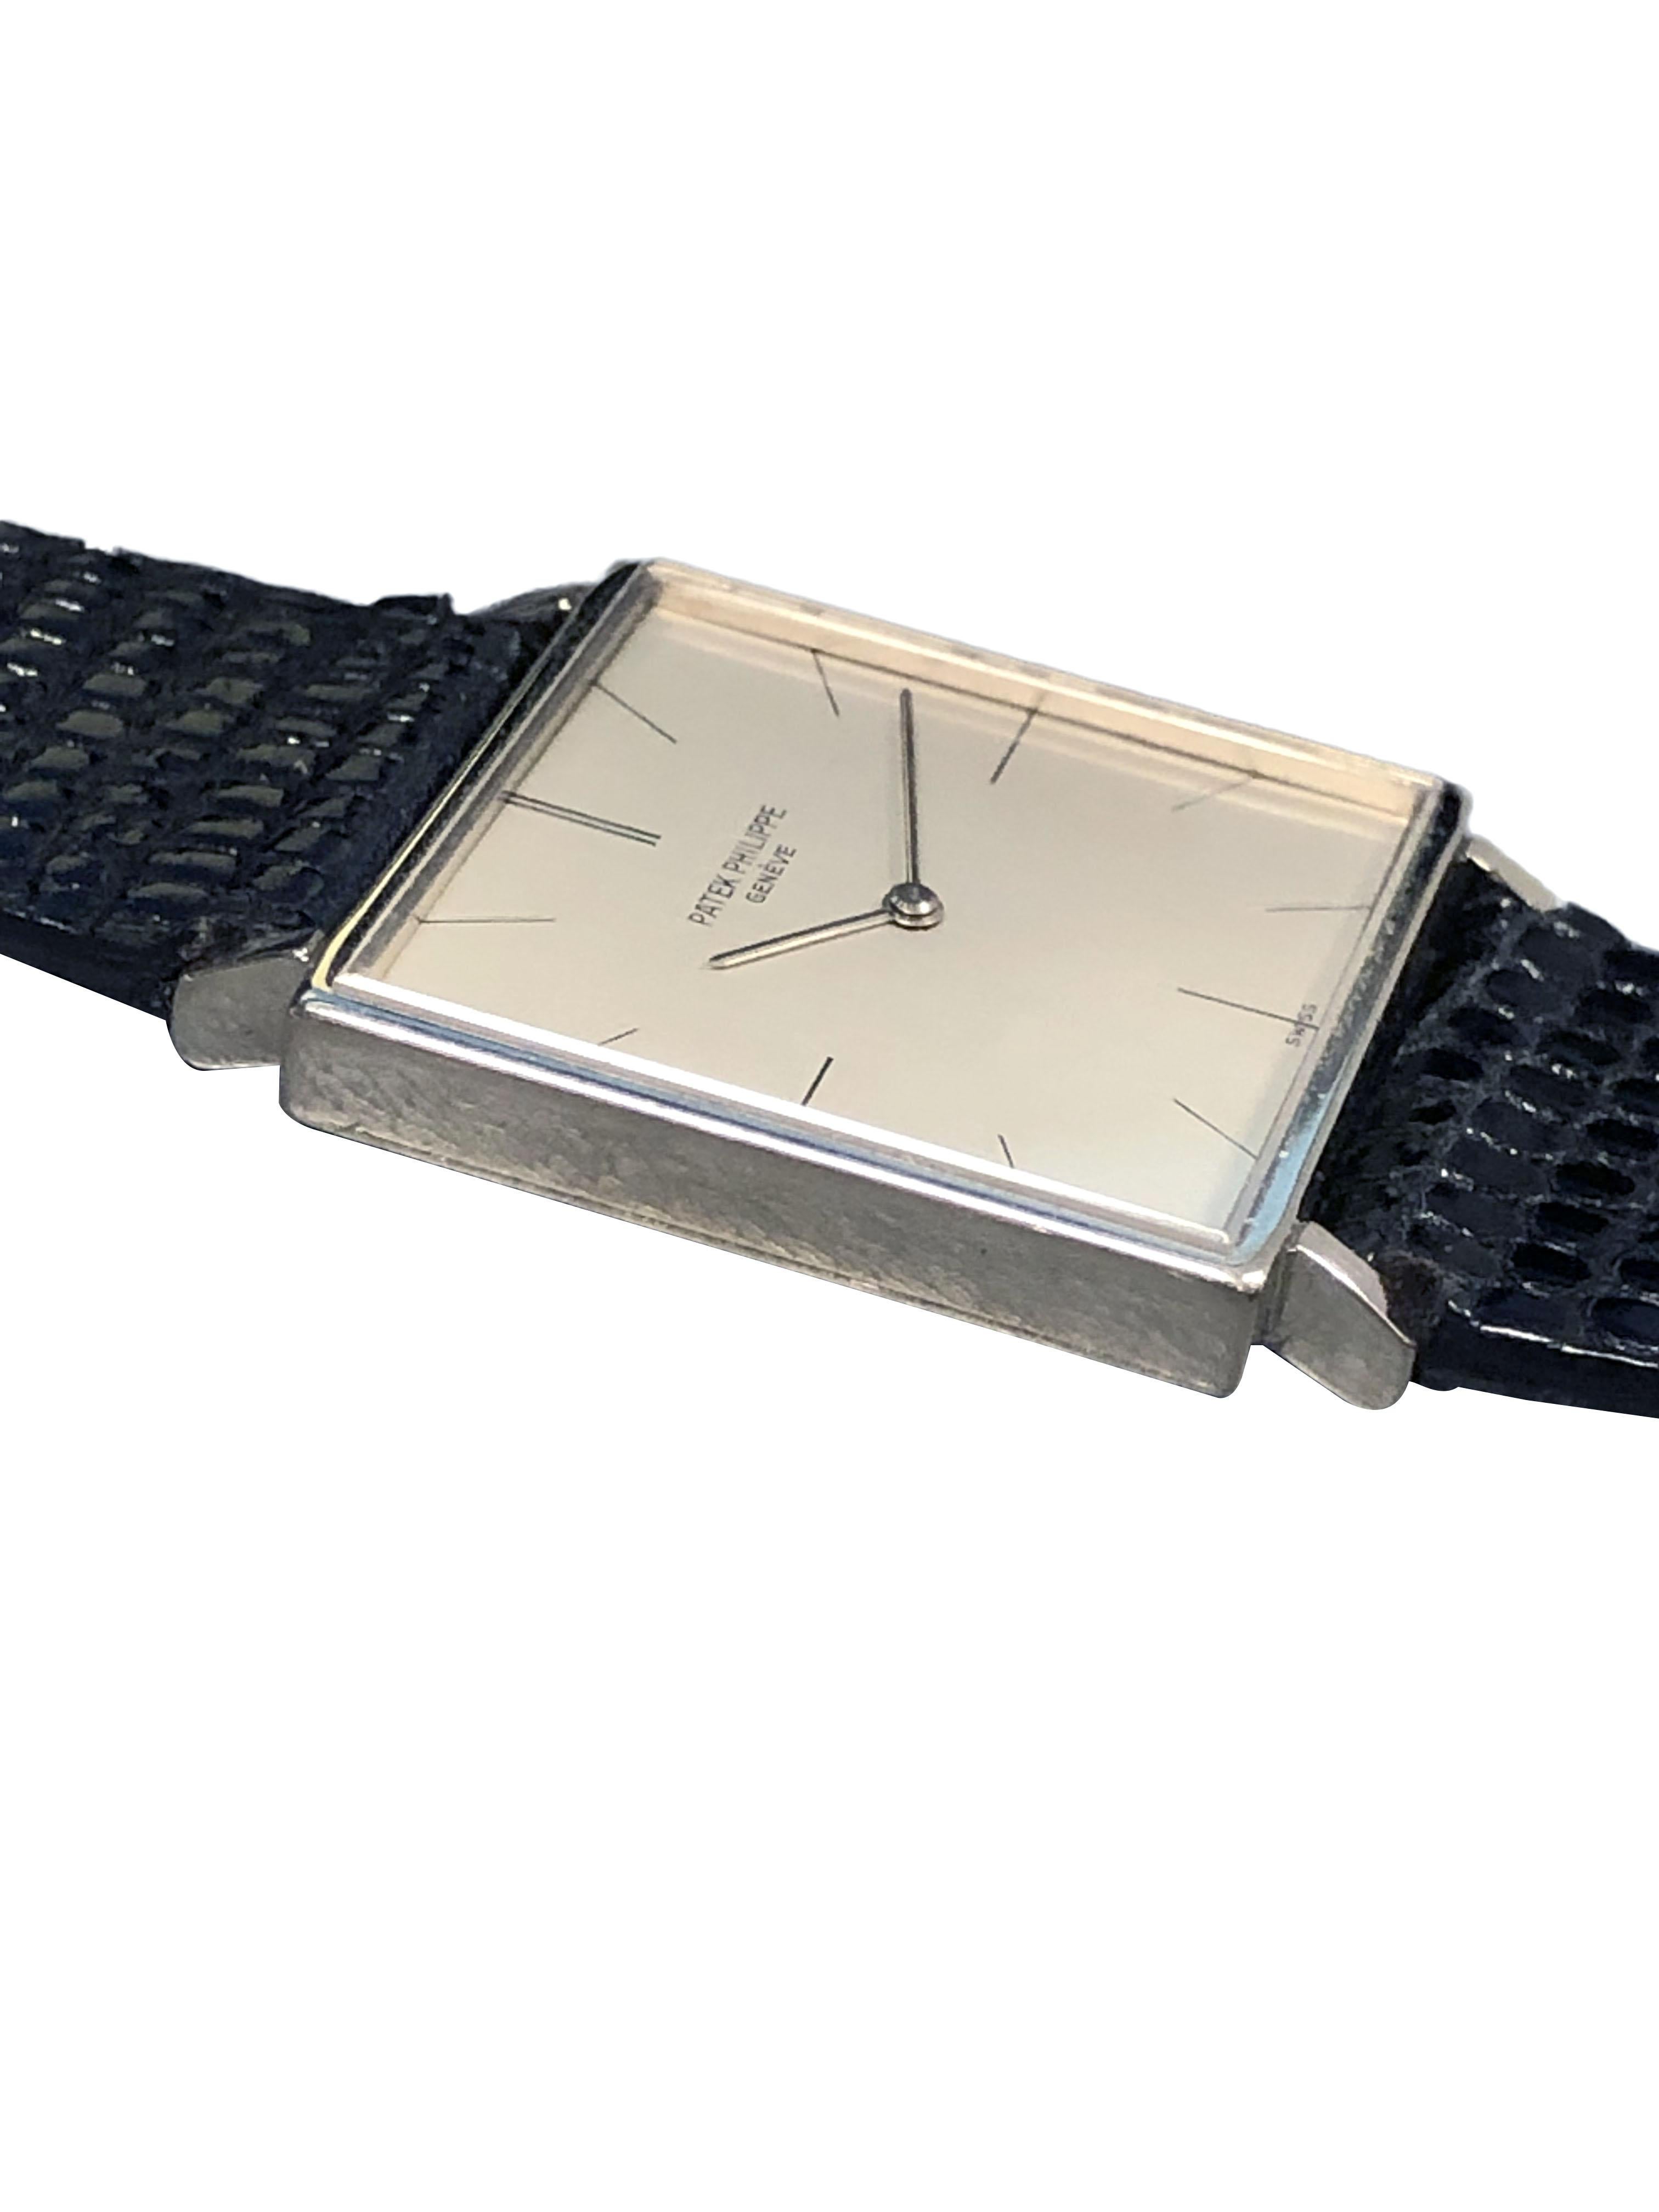 Circa 1960 Patek Philippe Reference 3503 Wrist Watch, 25 X 26 M.M. x 4 M.M. thick 18k White Gold 2 piece case. 18 Jewel Caliber 175 Nickle Lever Mechanical, Manual wind movement. Original Silver Satin Dial With Black markers, Patek Philippe logo